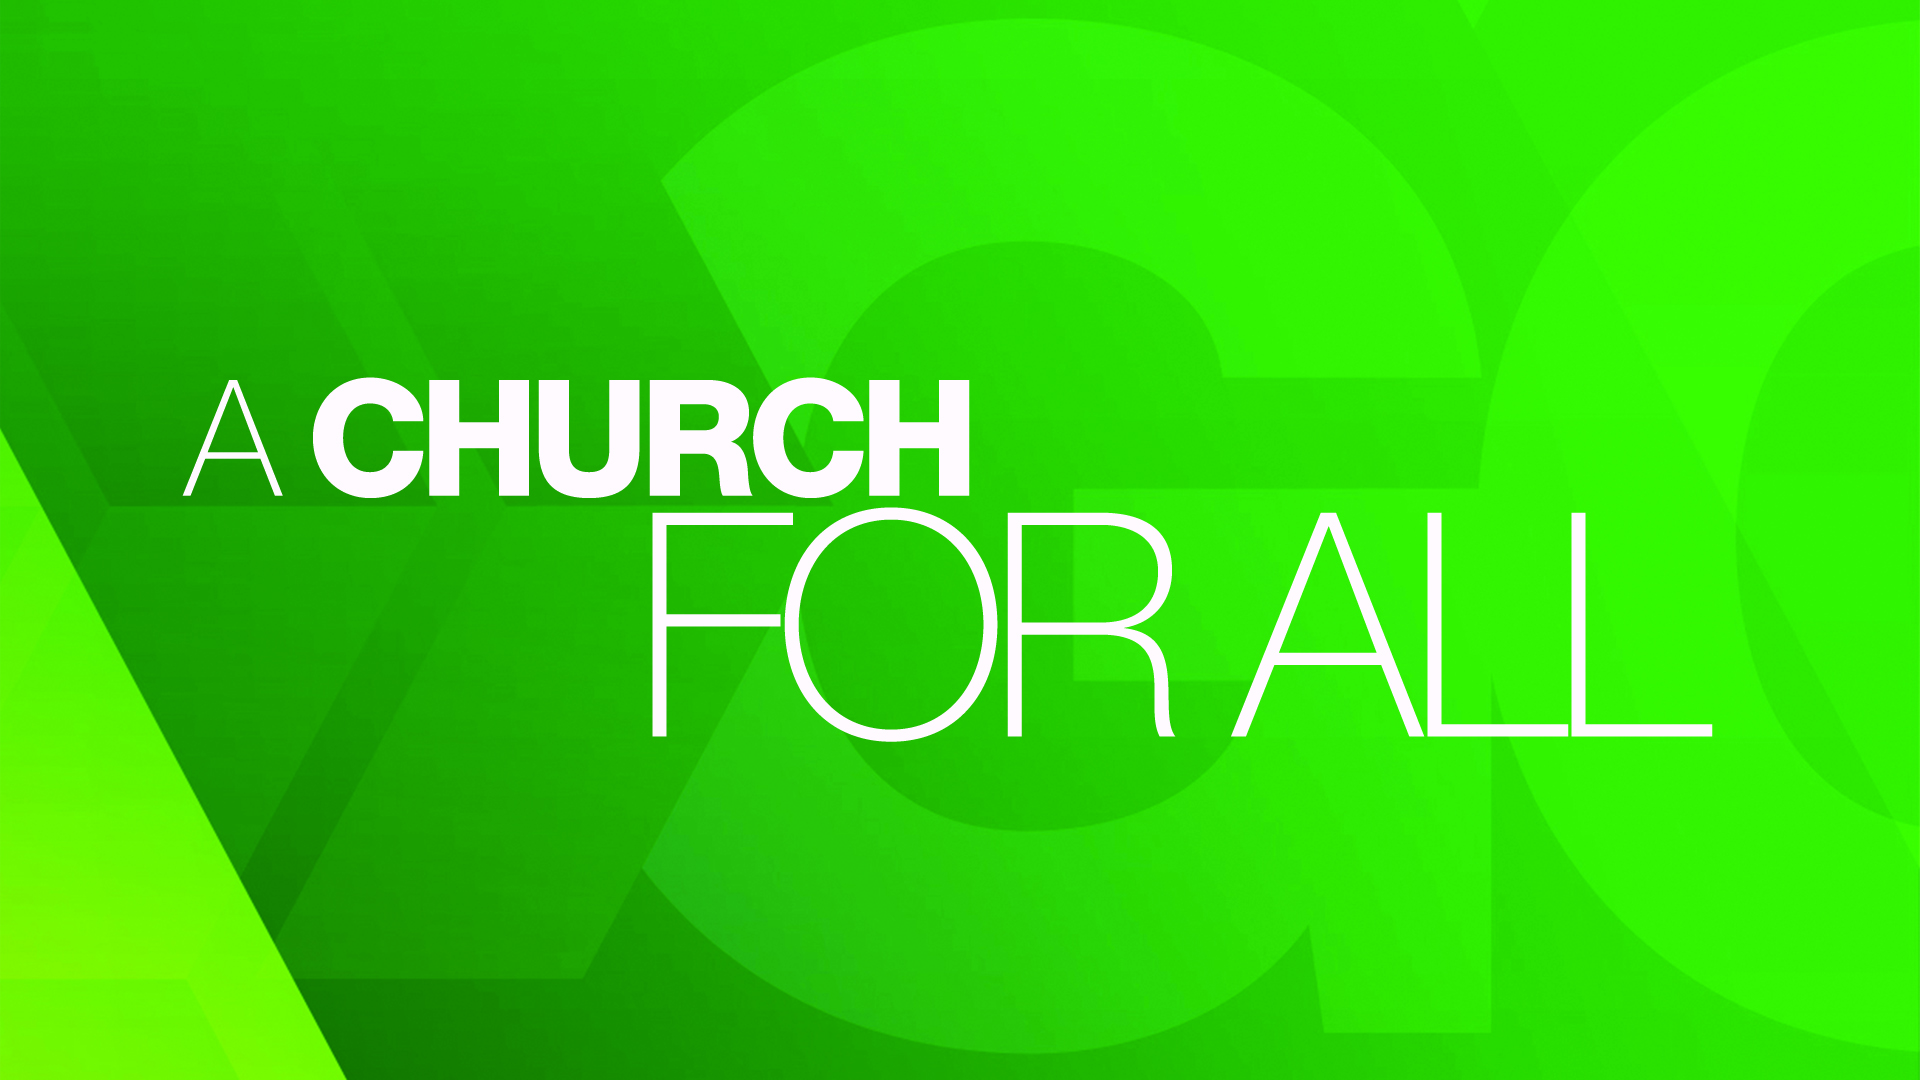 Image text: 'A Church for all'